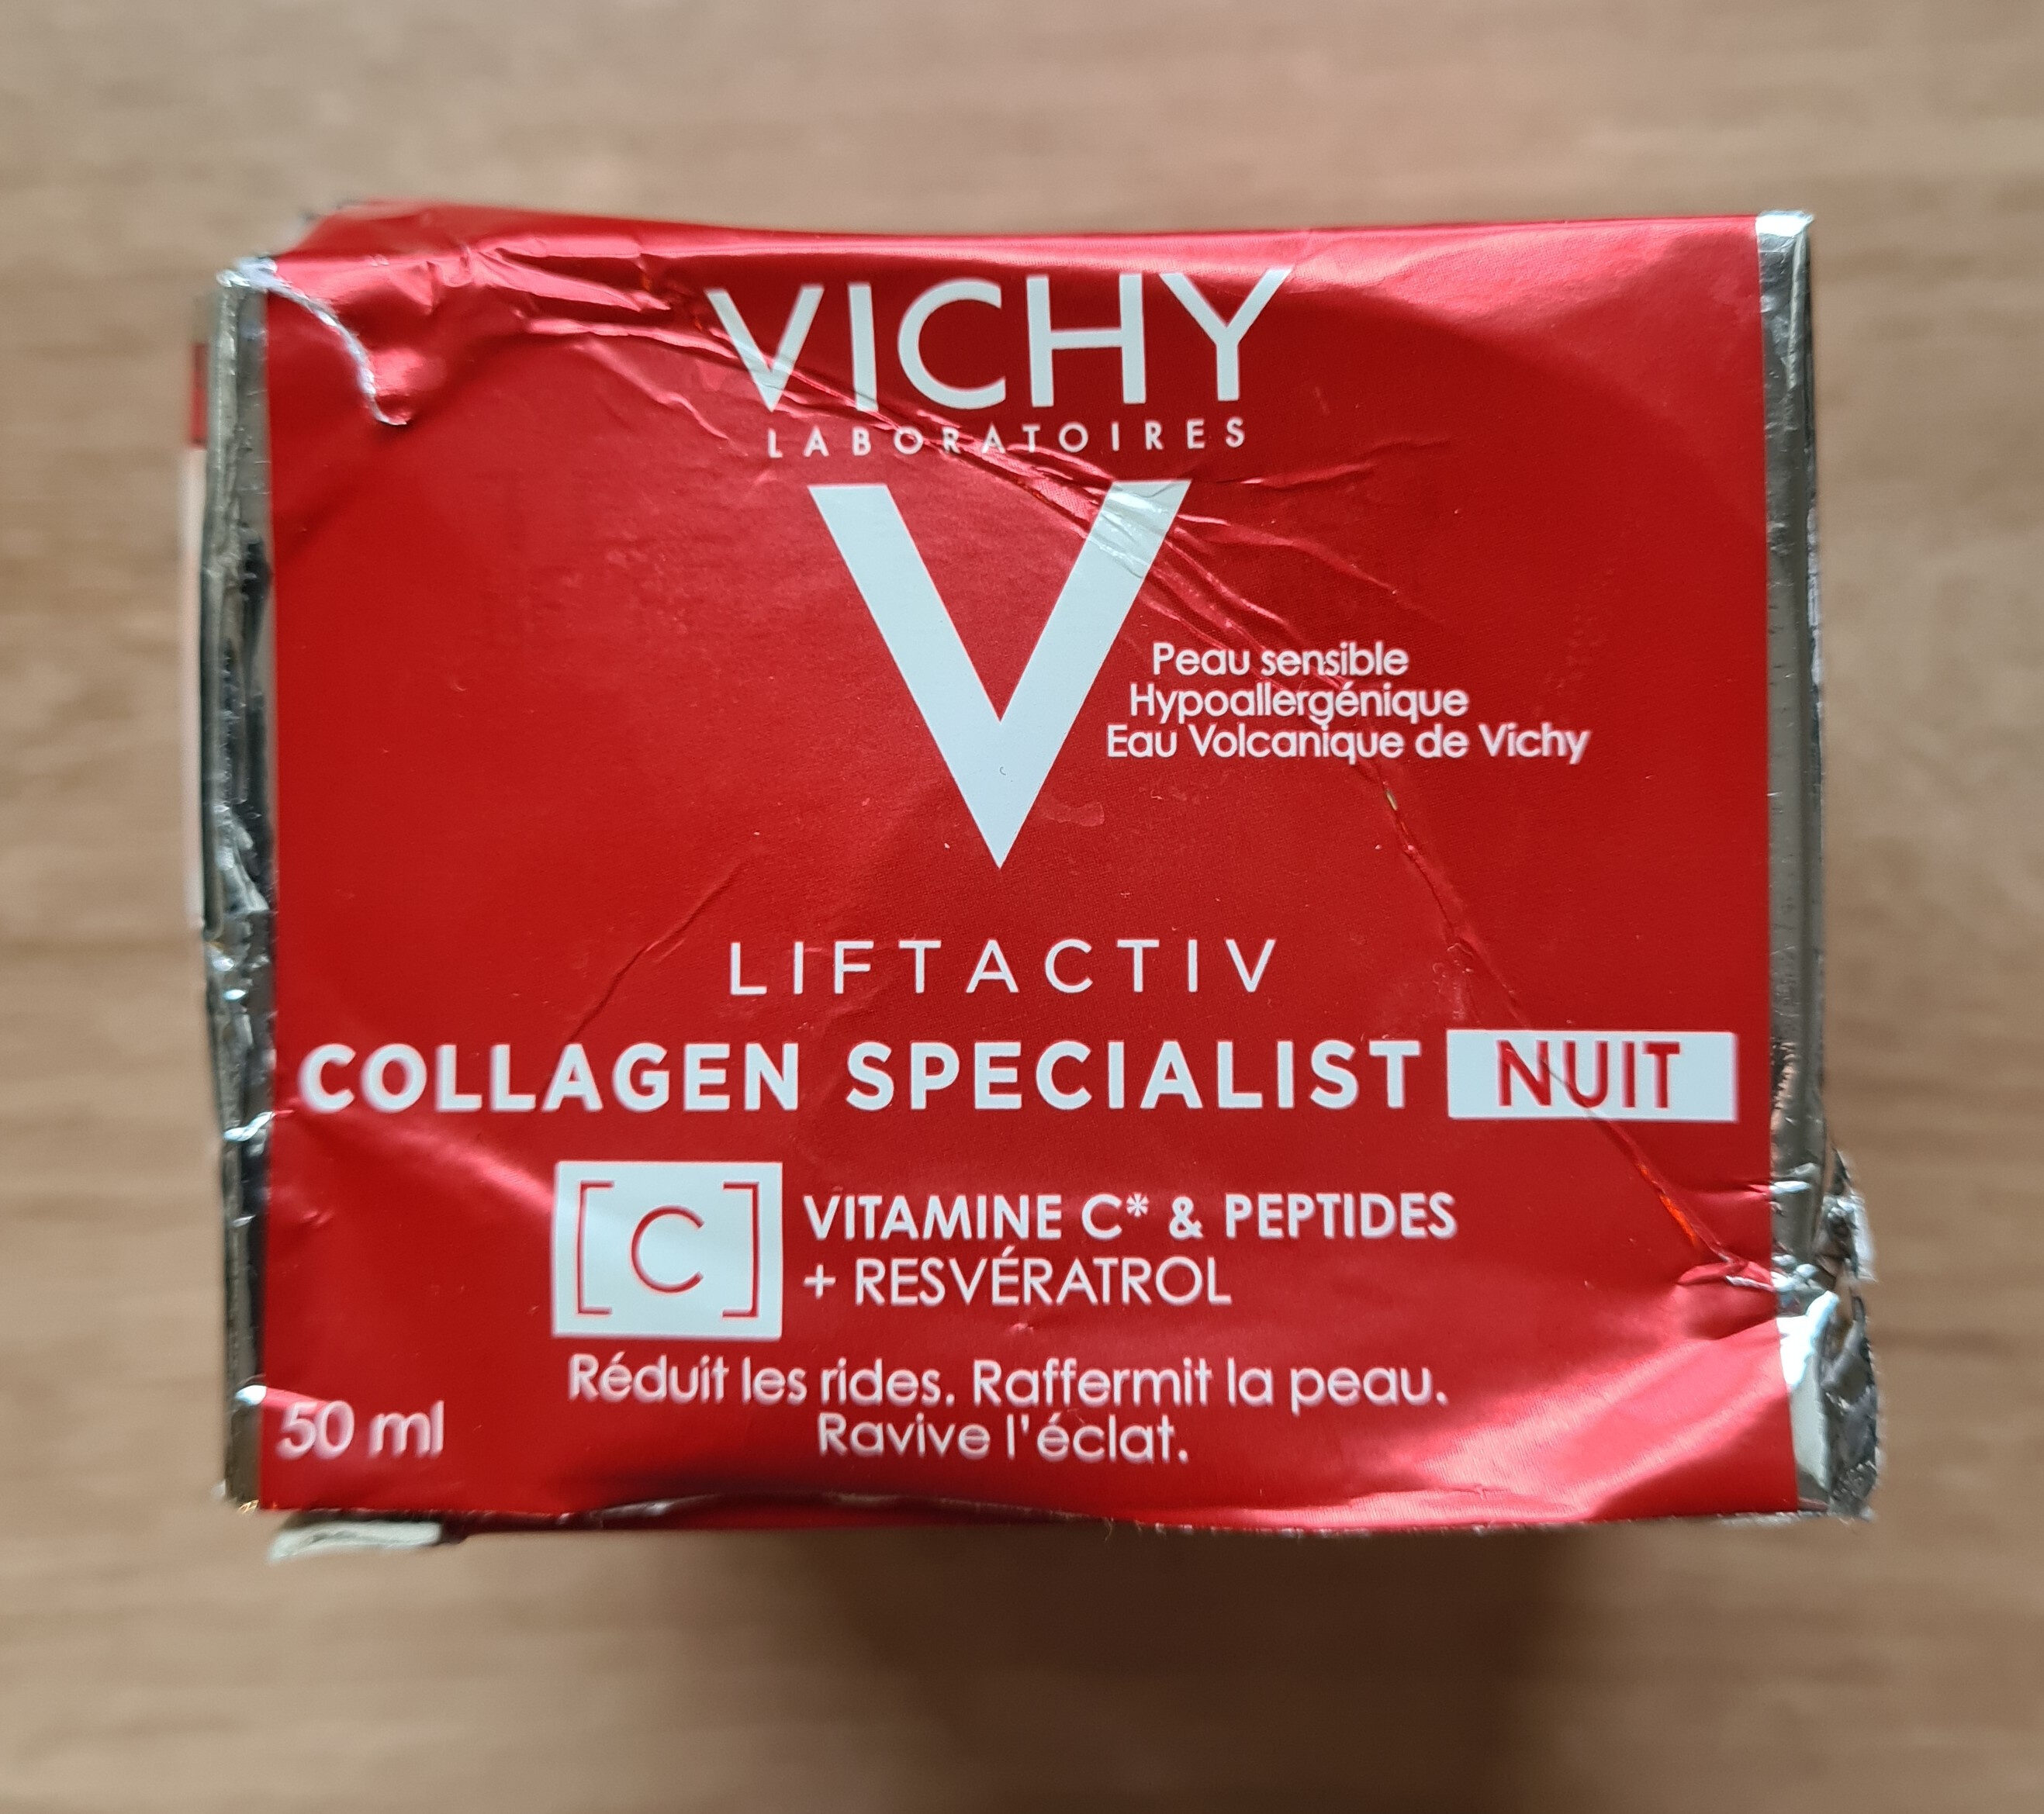 liftactiv collagen specialist - Product - fr